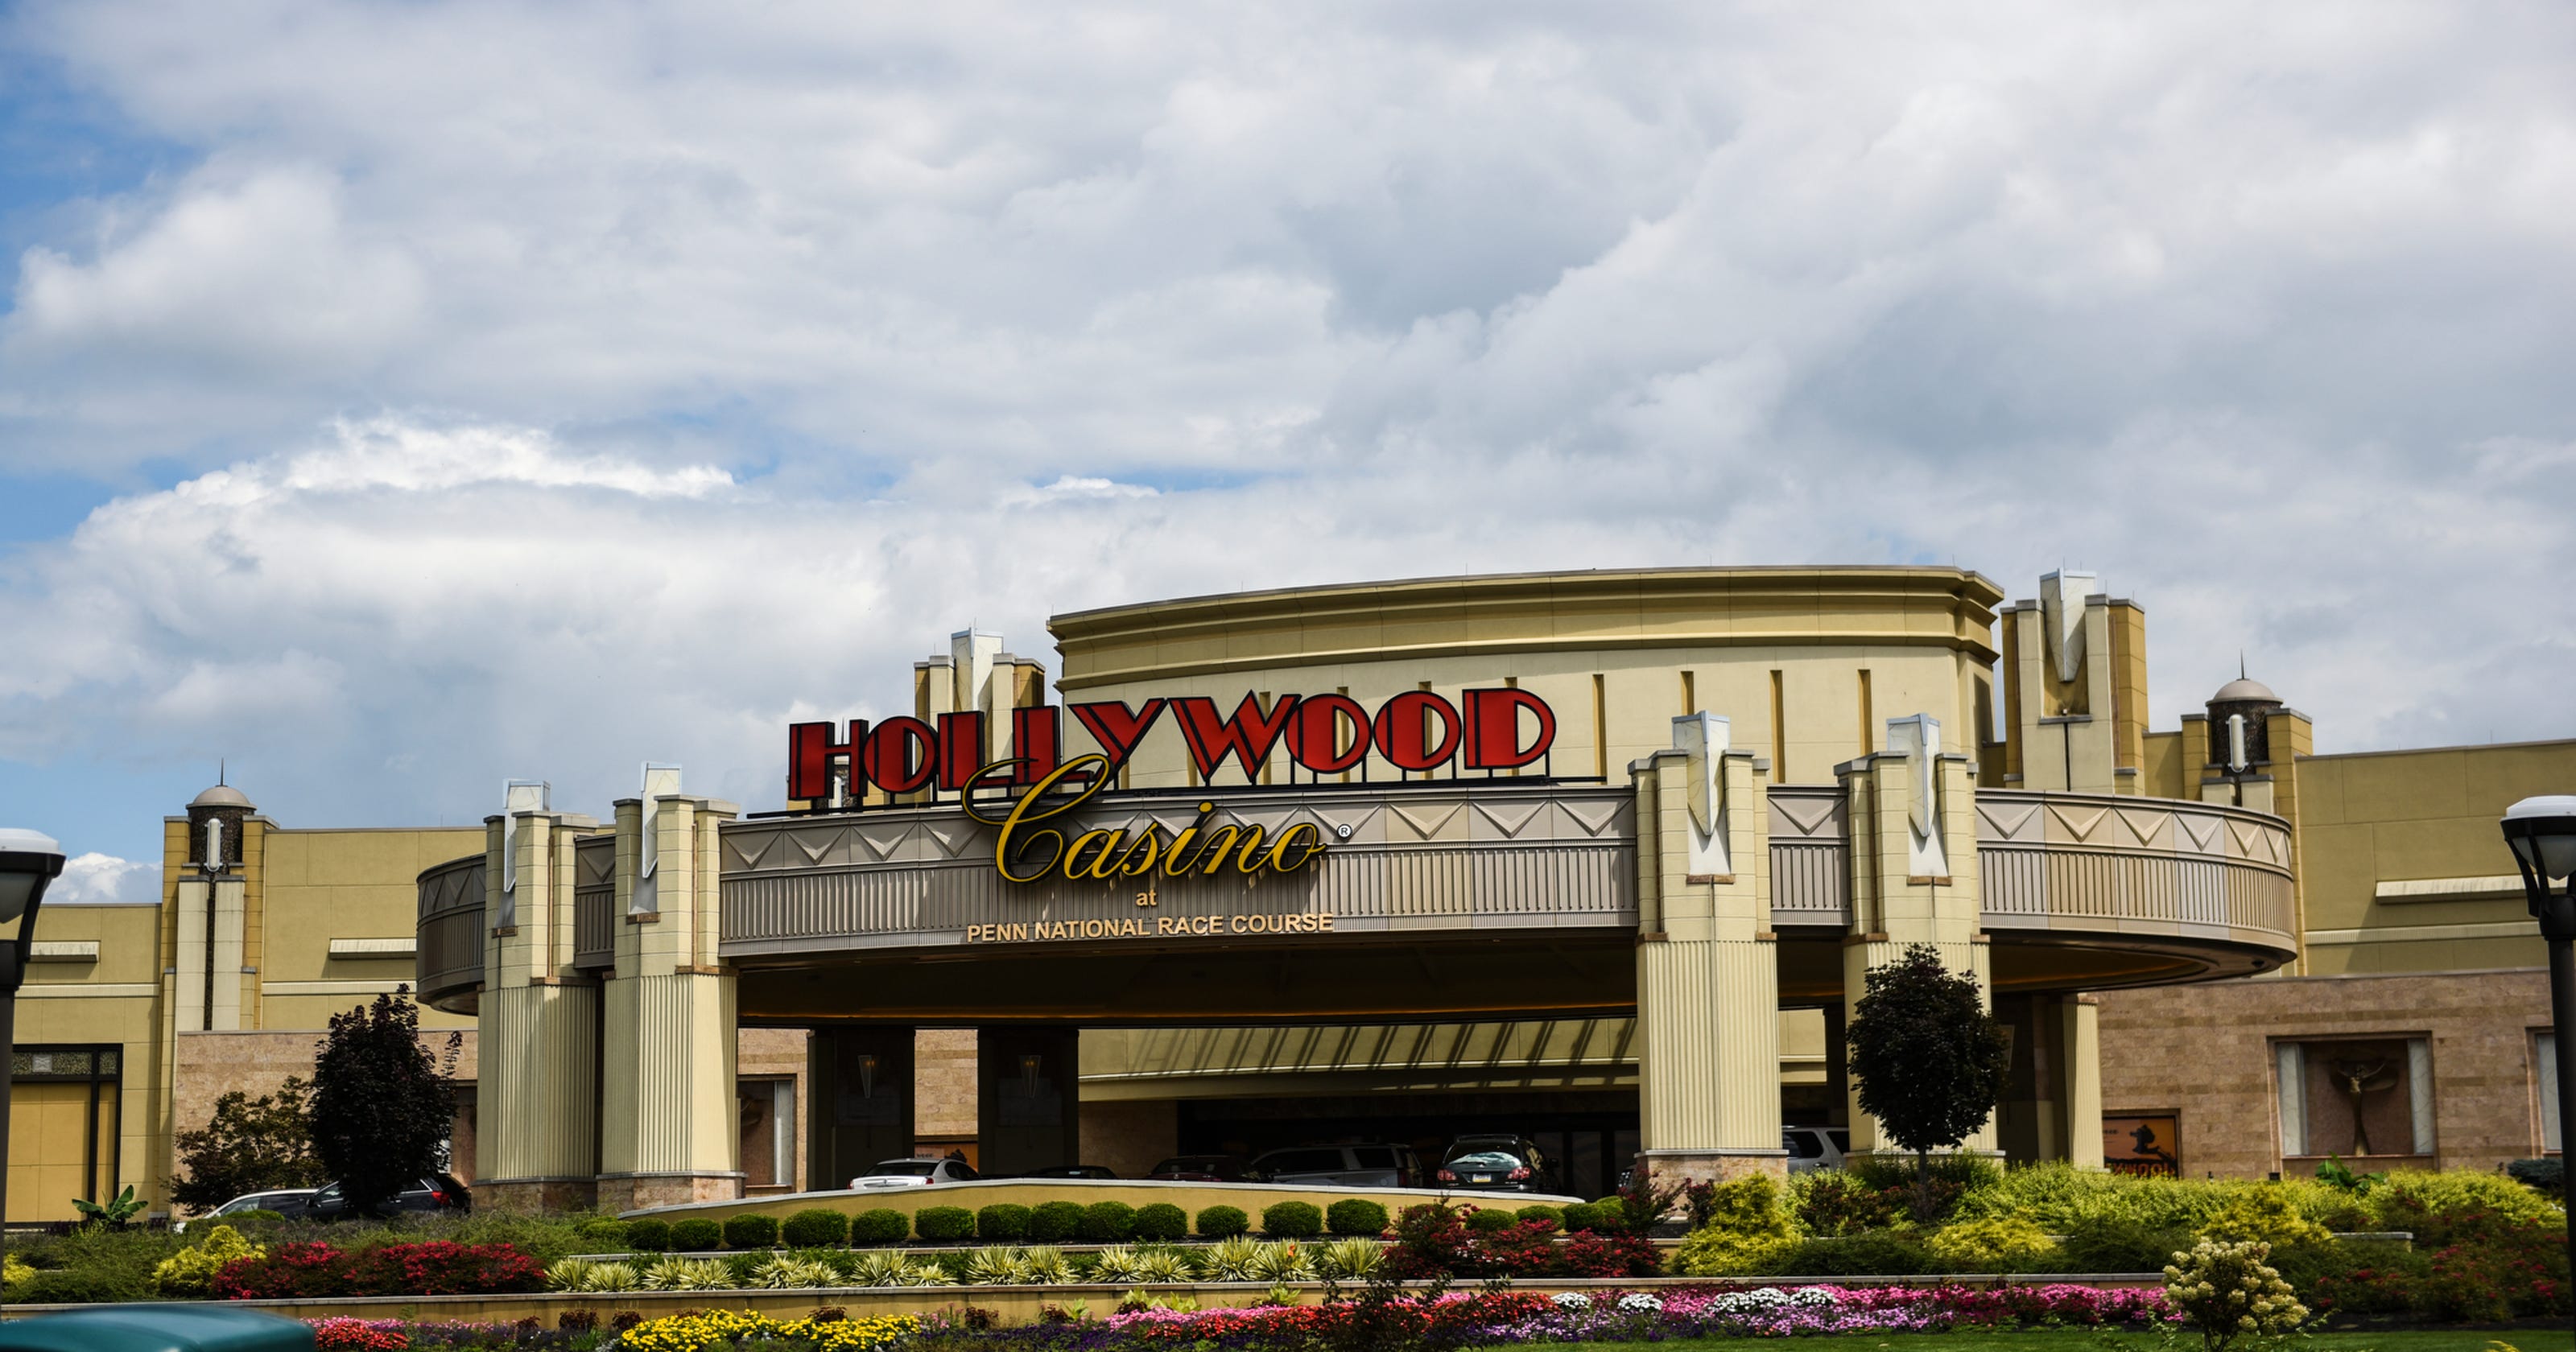 Top Hotels Closest To Hollywood Casino In Lawrenceburg E1ADWF